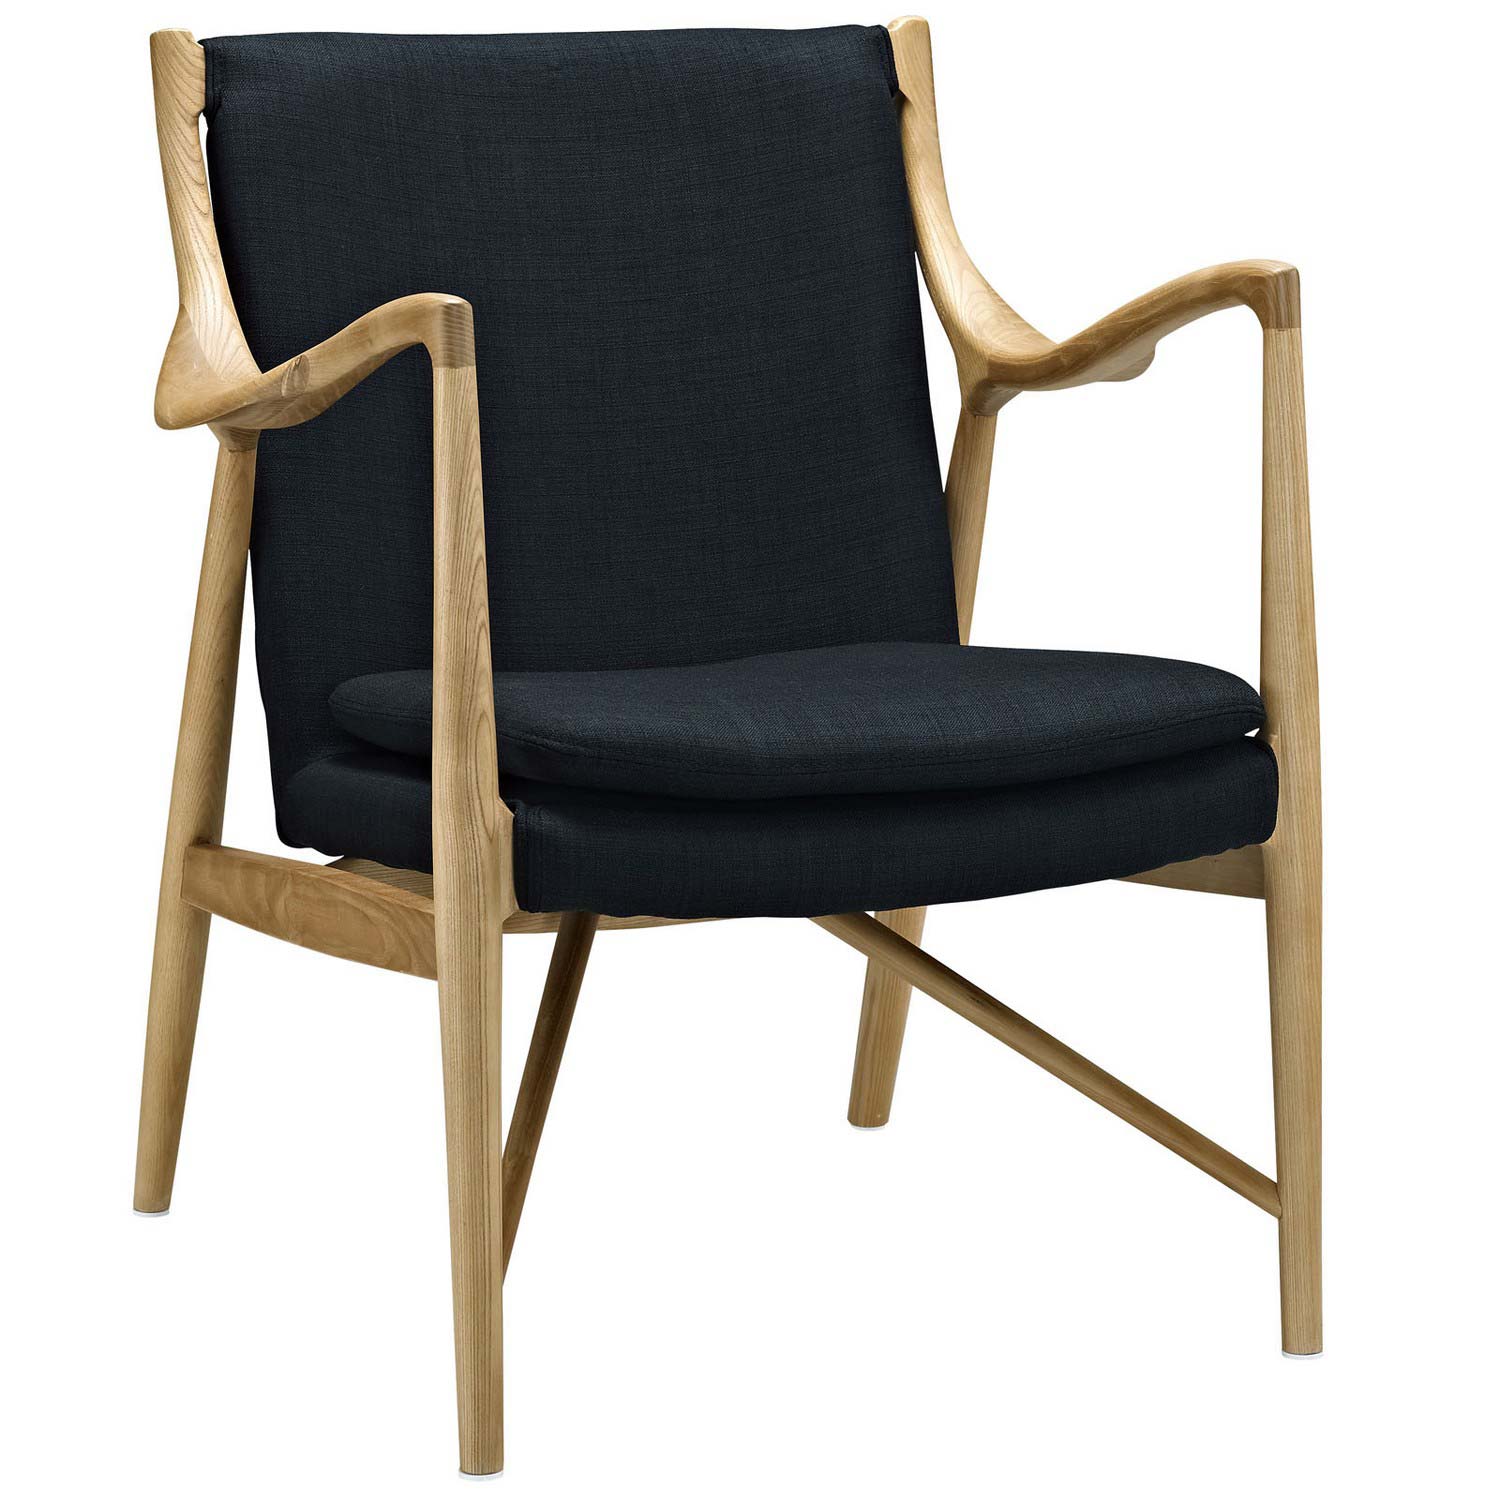 Modway Makeshift Upholstered Lounge Chair - Birch Black